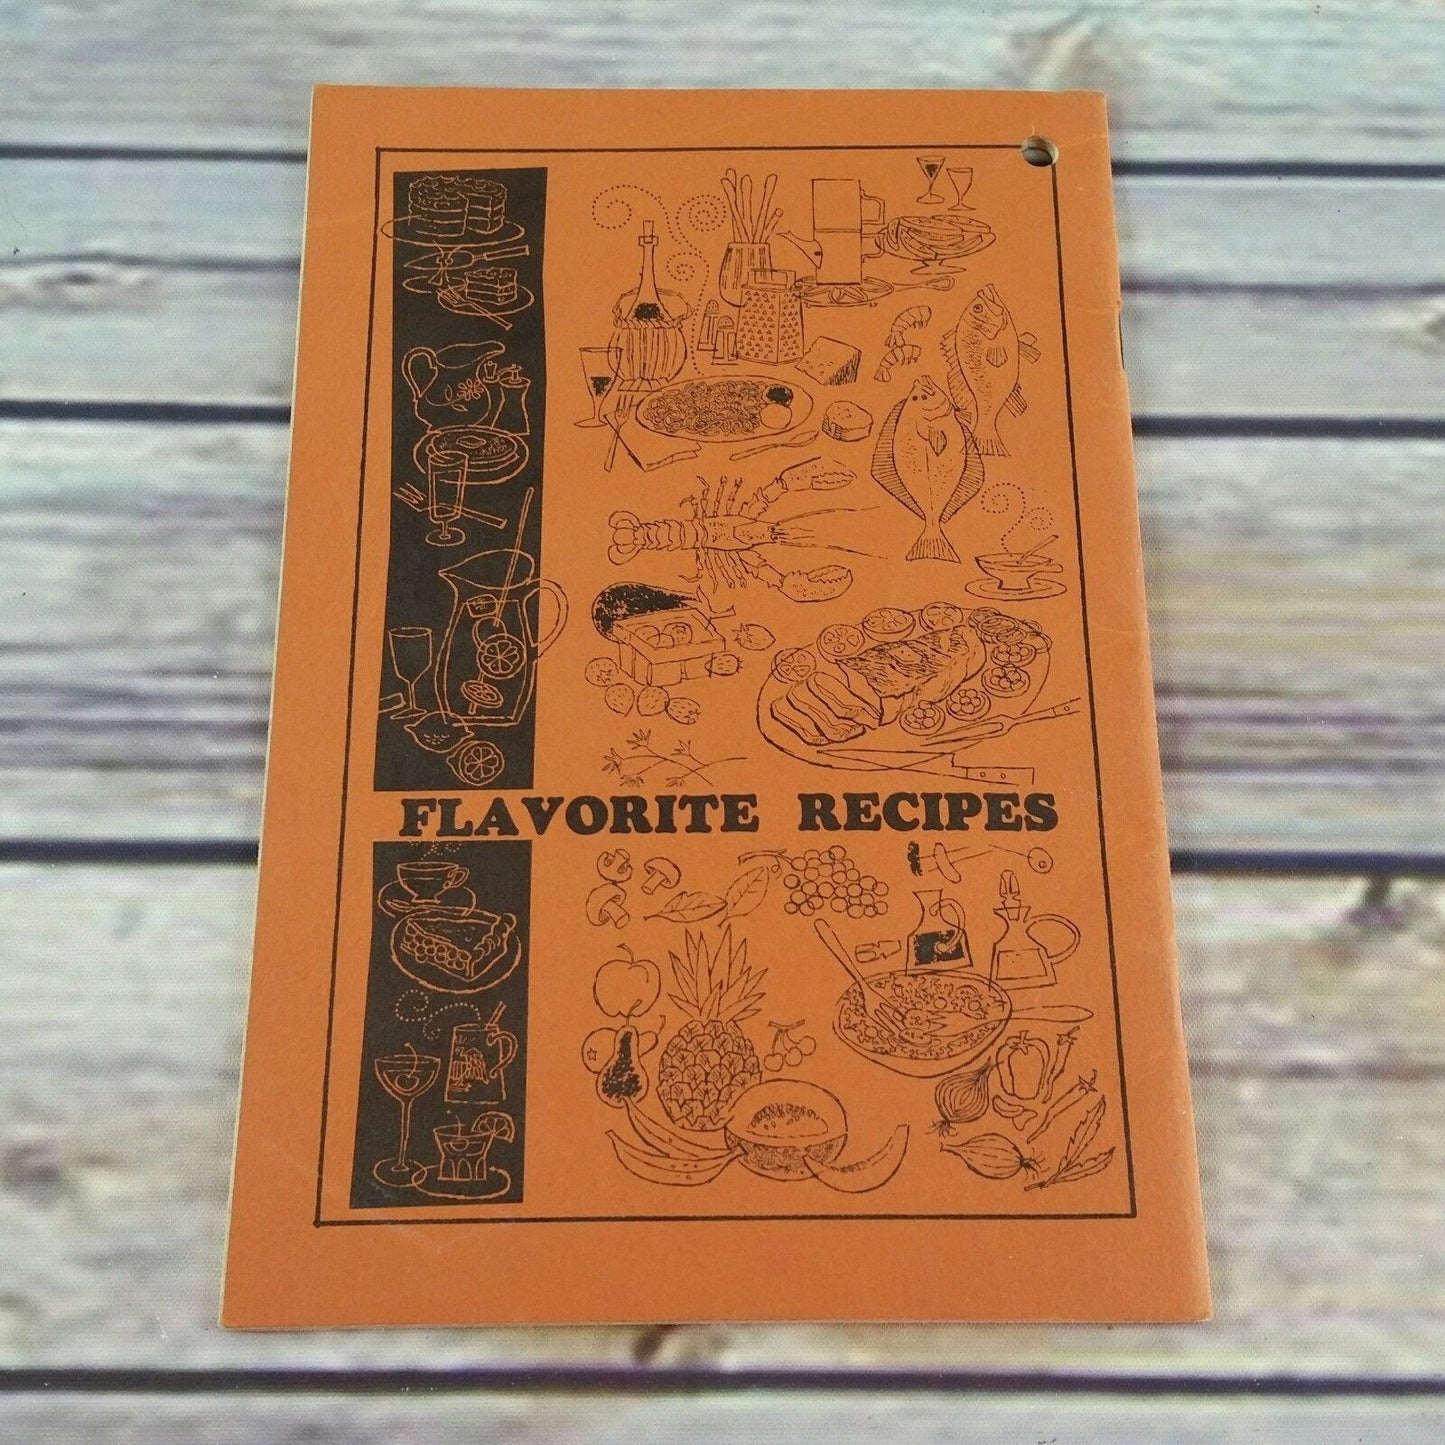 Vintage Cookbook Flavorite Recipes from the Farmers Almanac 1972 Recipes Paperback Booklet Printed in the USA